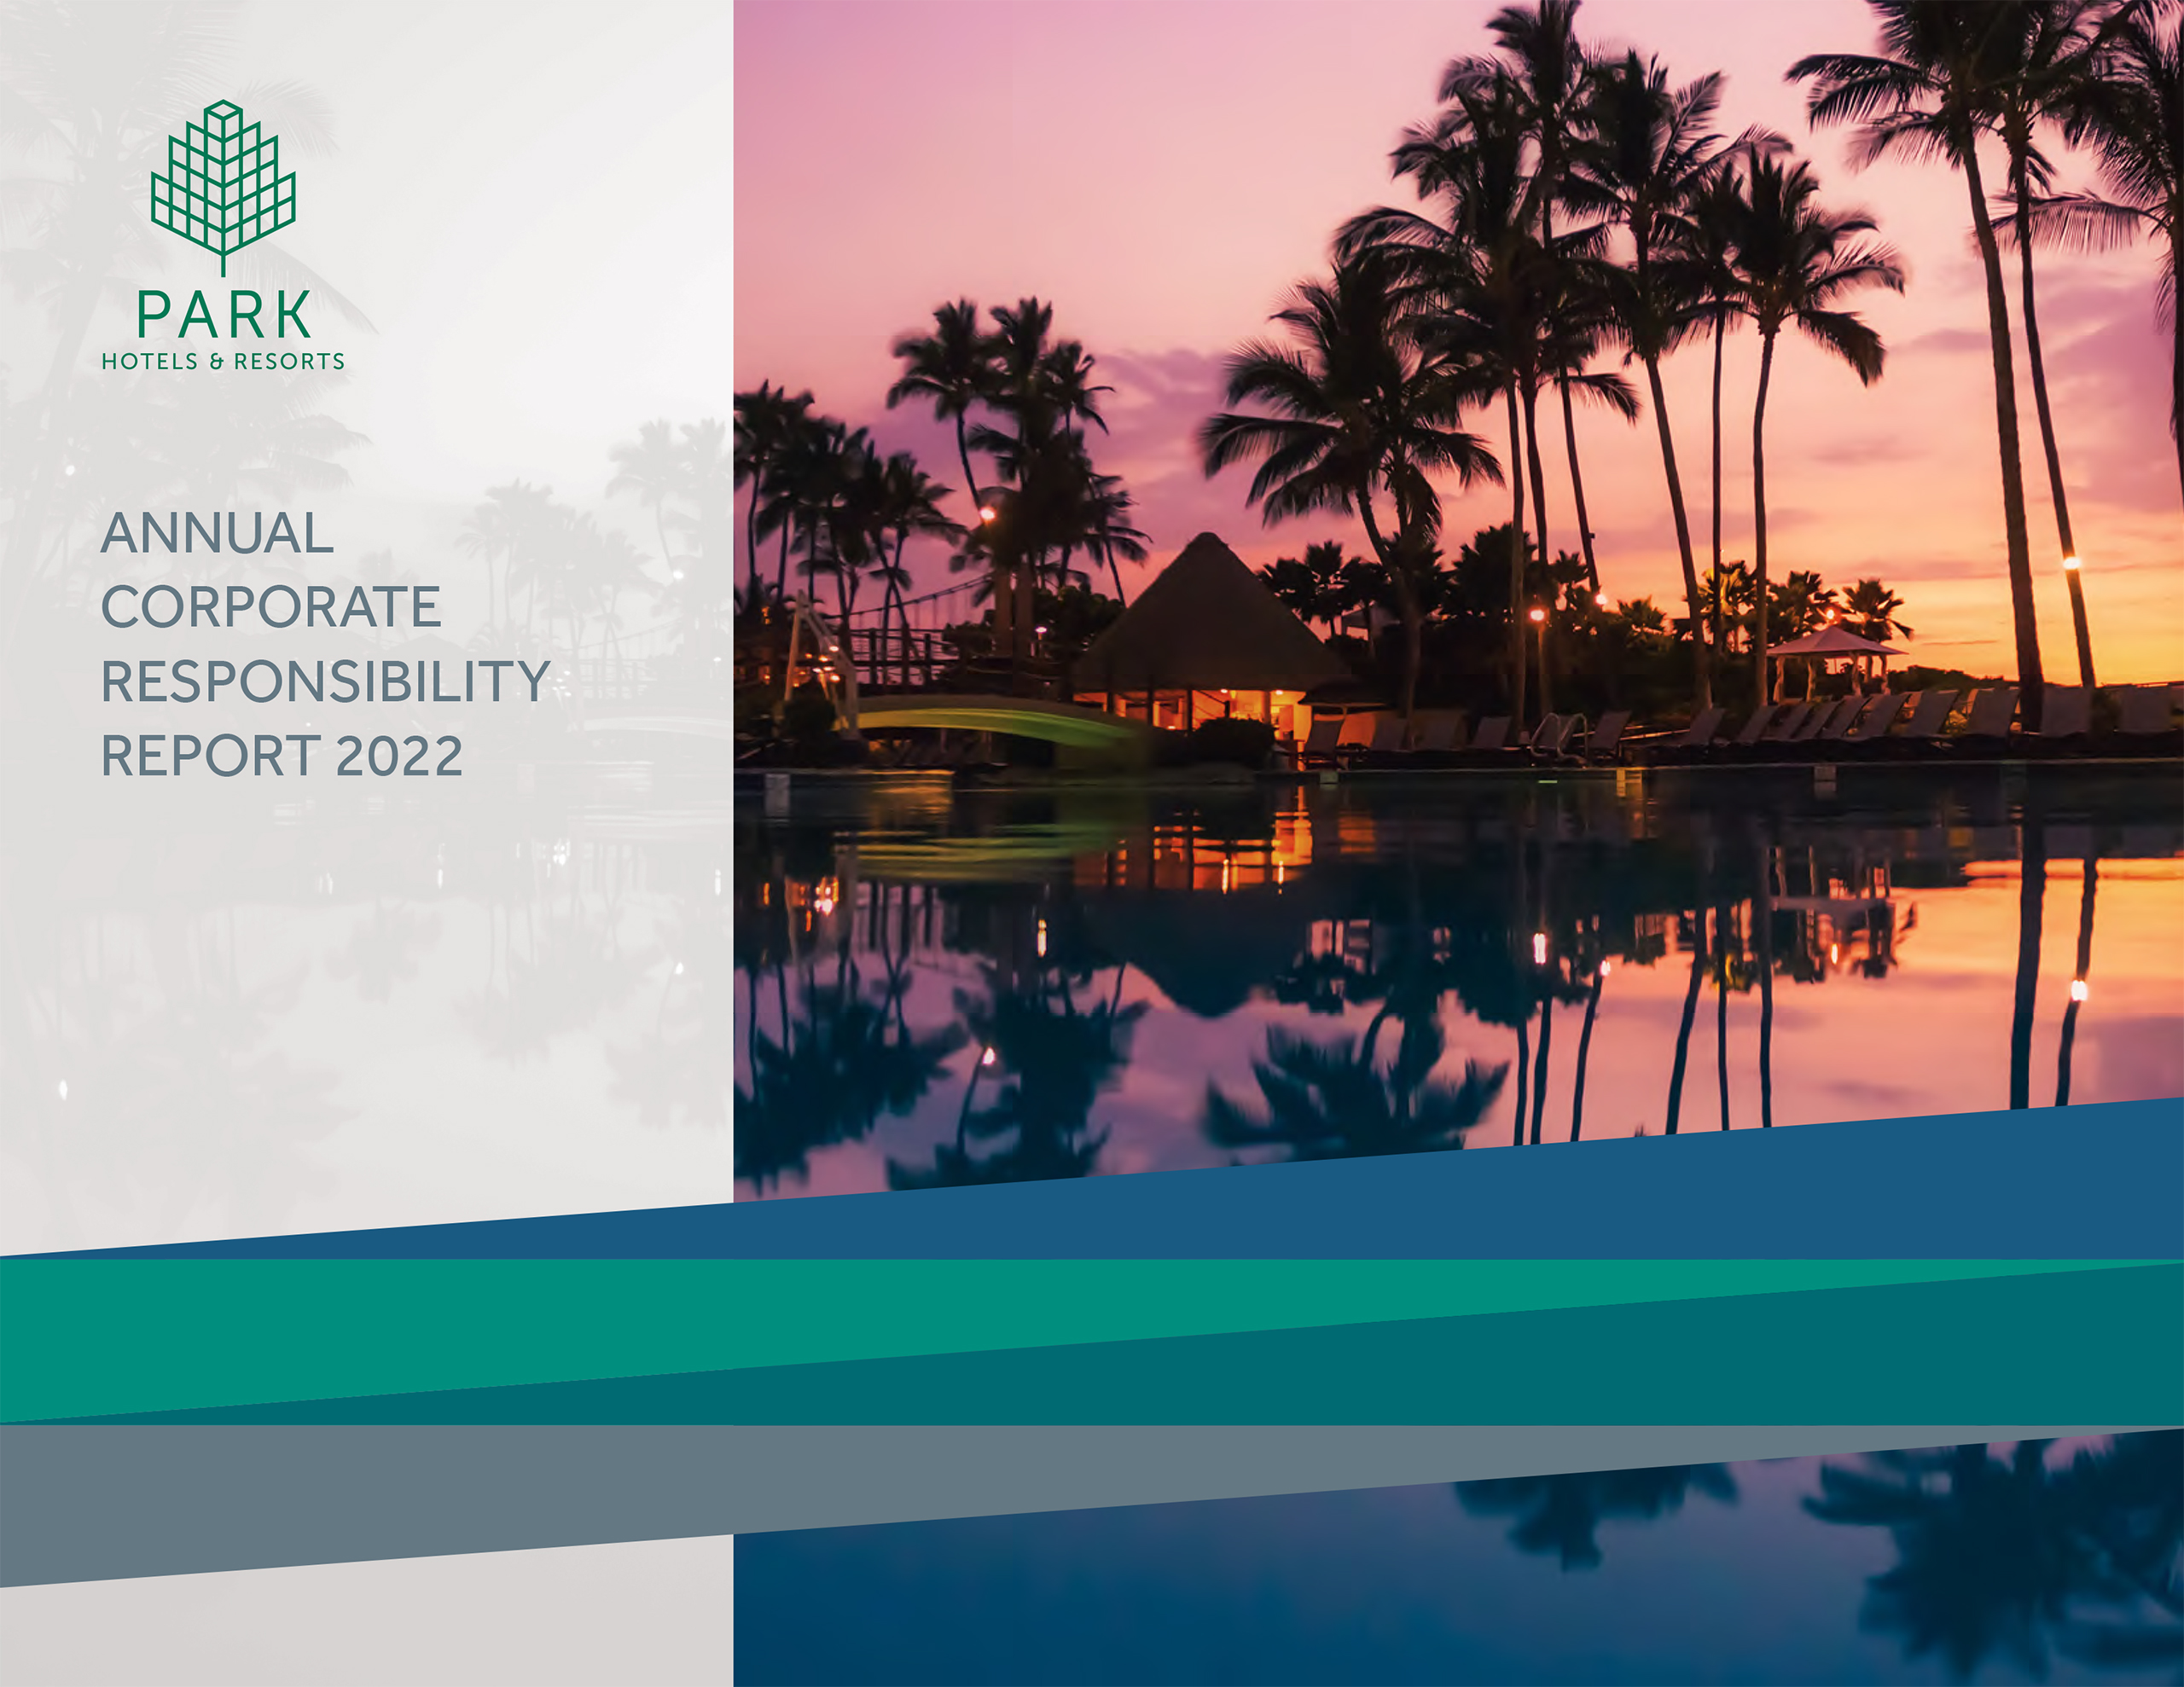 Park Hotels & Resorts 2021 Annual Corporate Responsibility Report